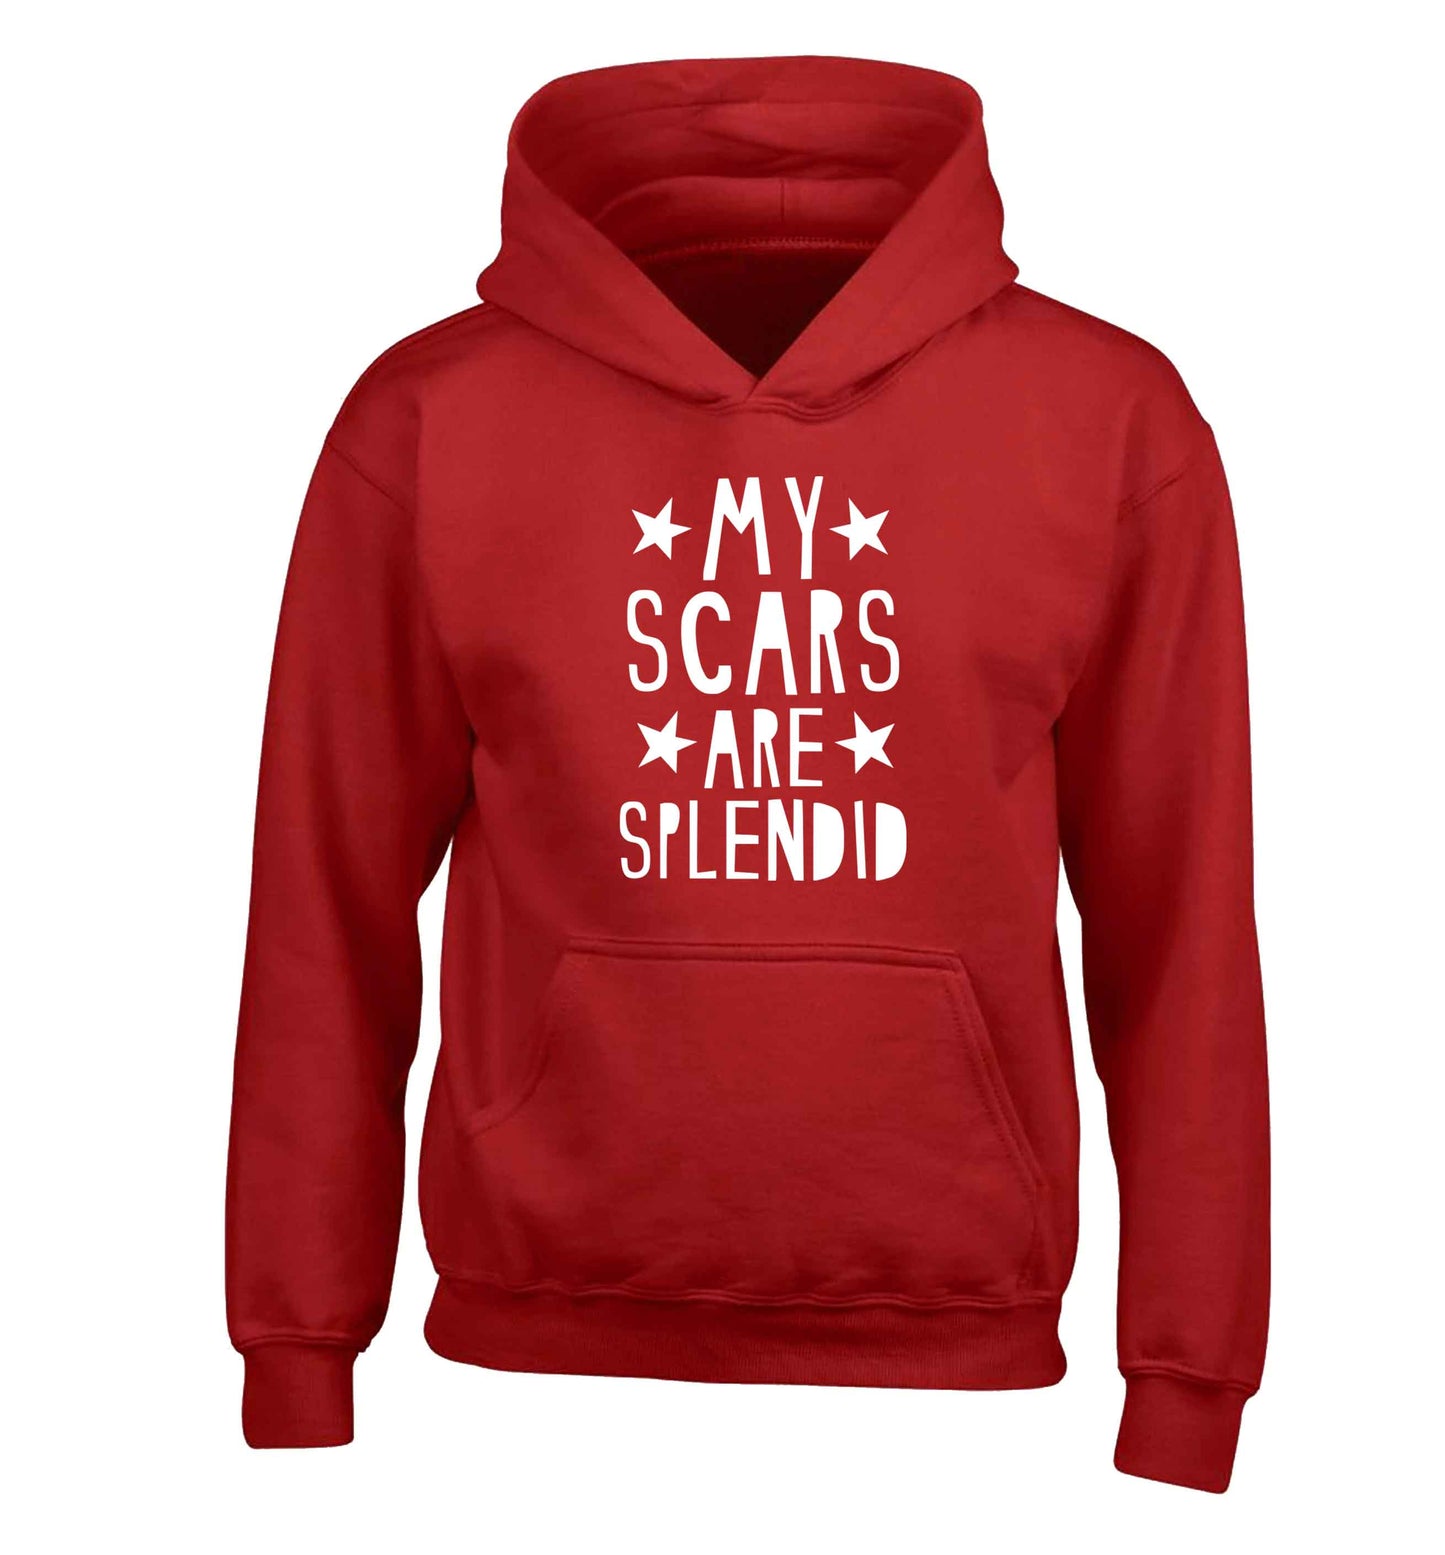 My scars are beautiful children's red hoodie 12-13 Years